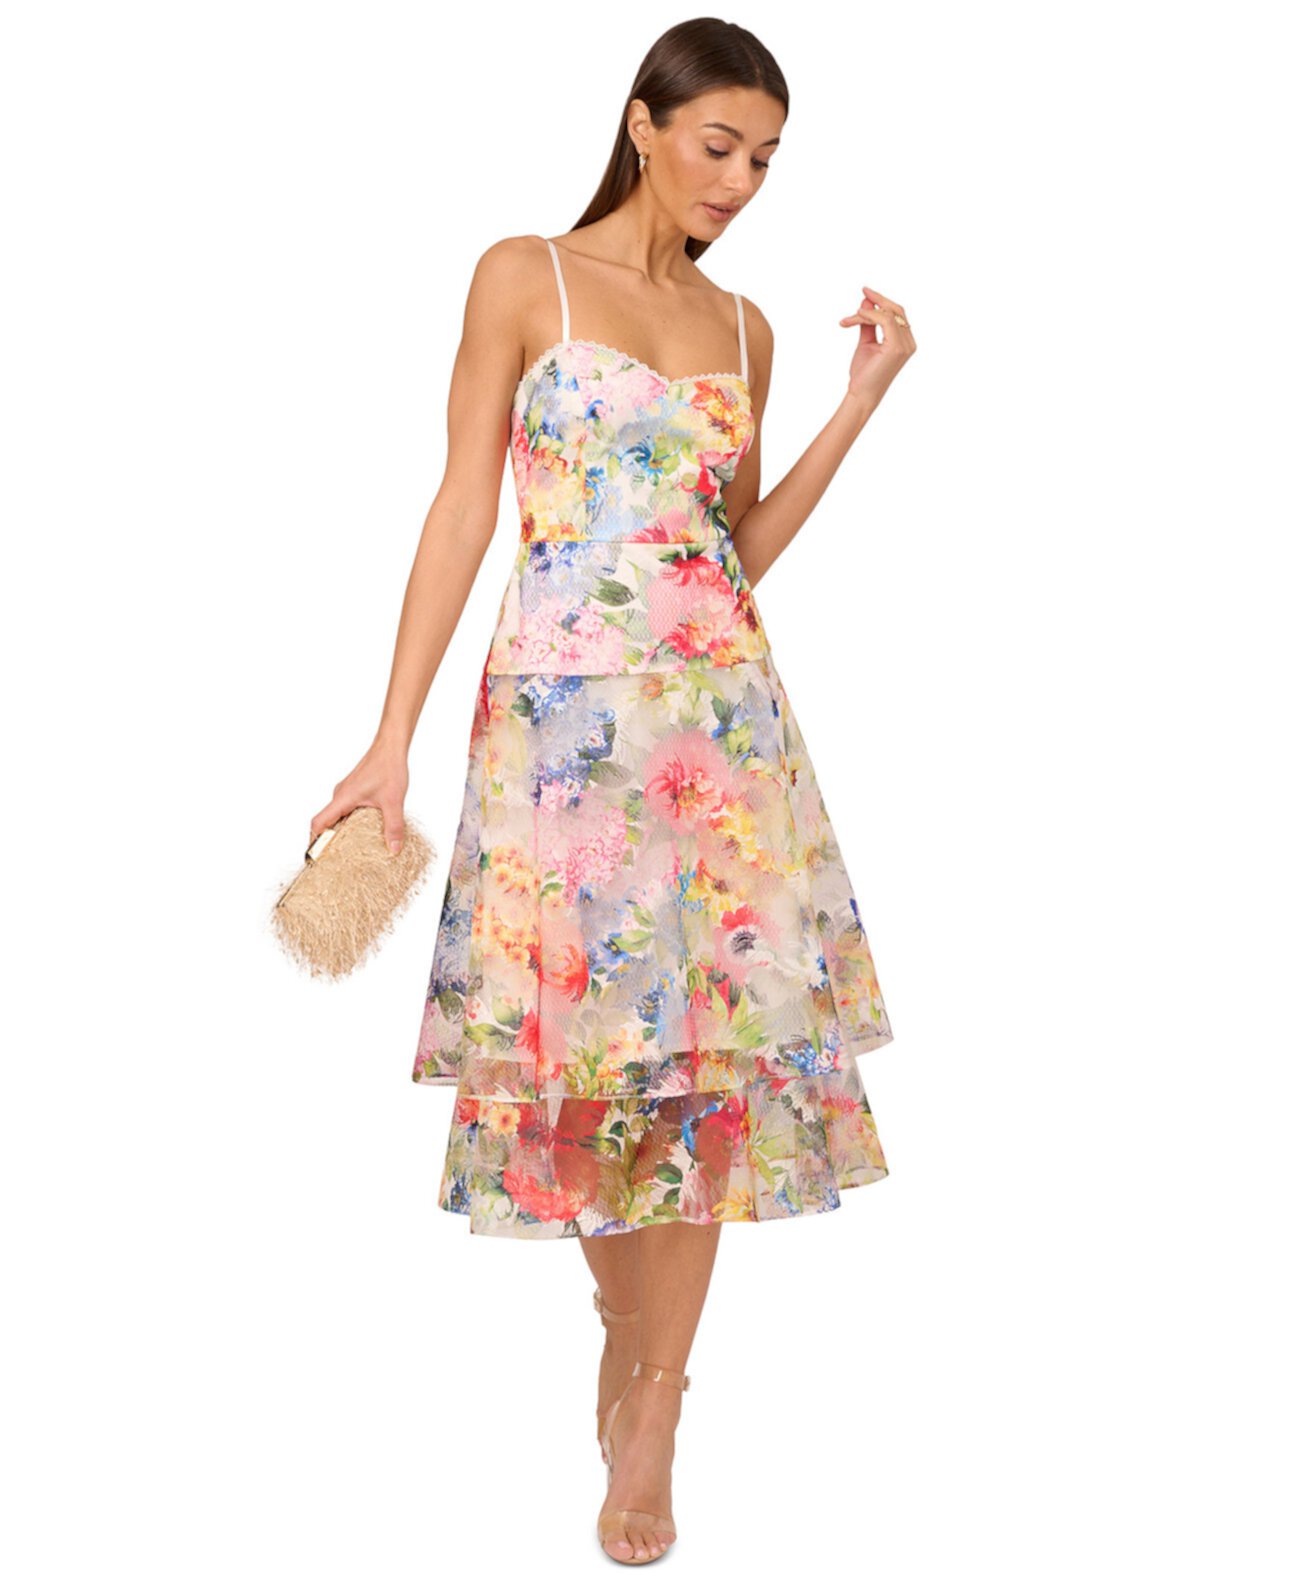 Women's Printed Embroidered Fit & Flare Dress Adrianna by Adrianna Papell